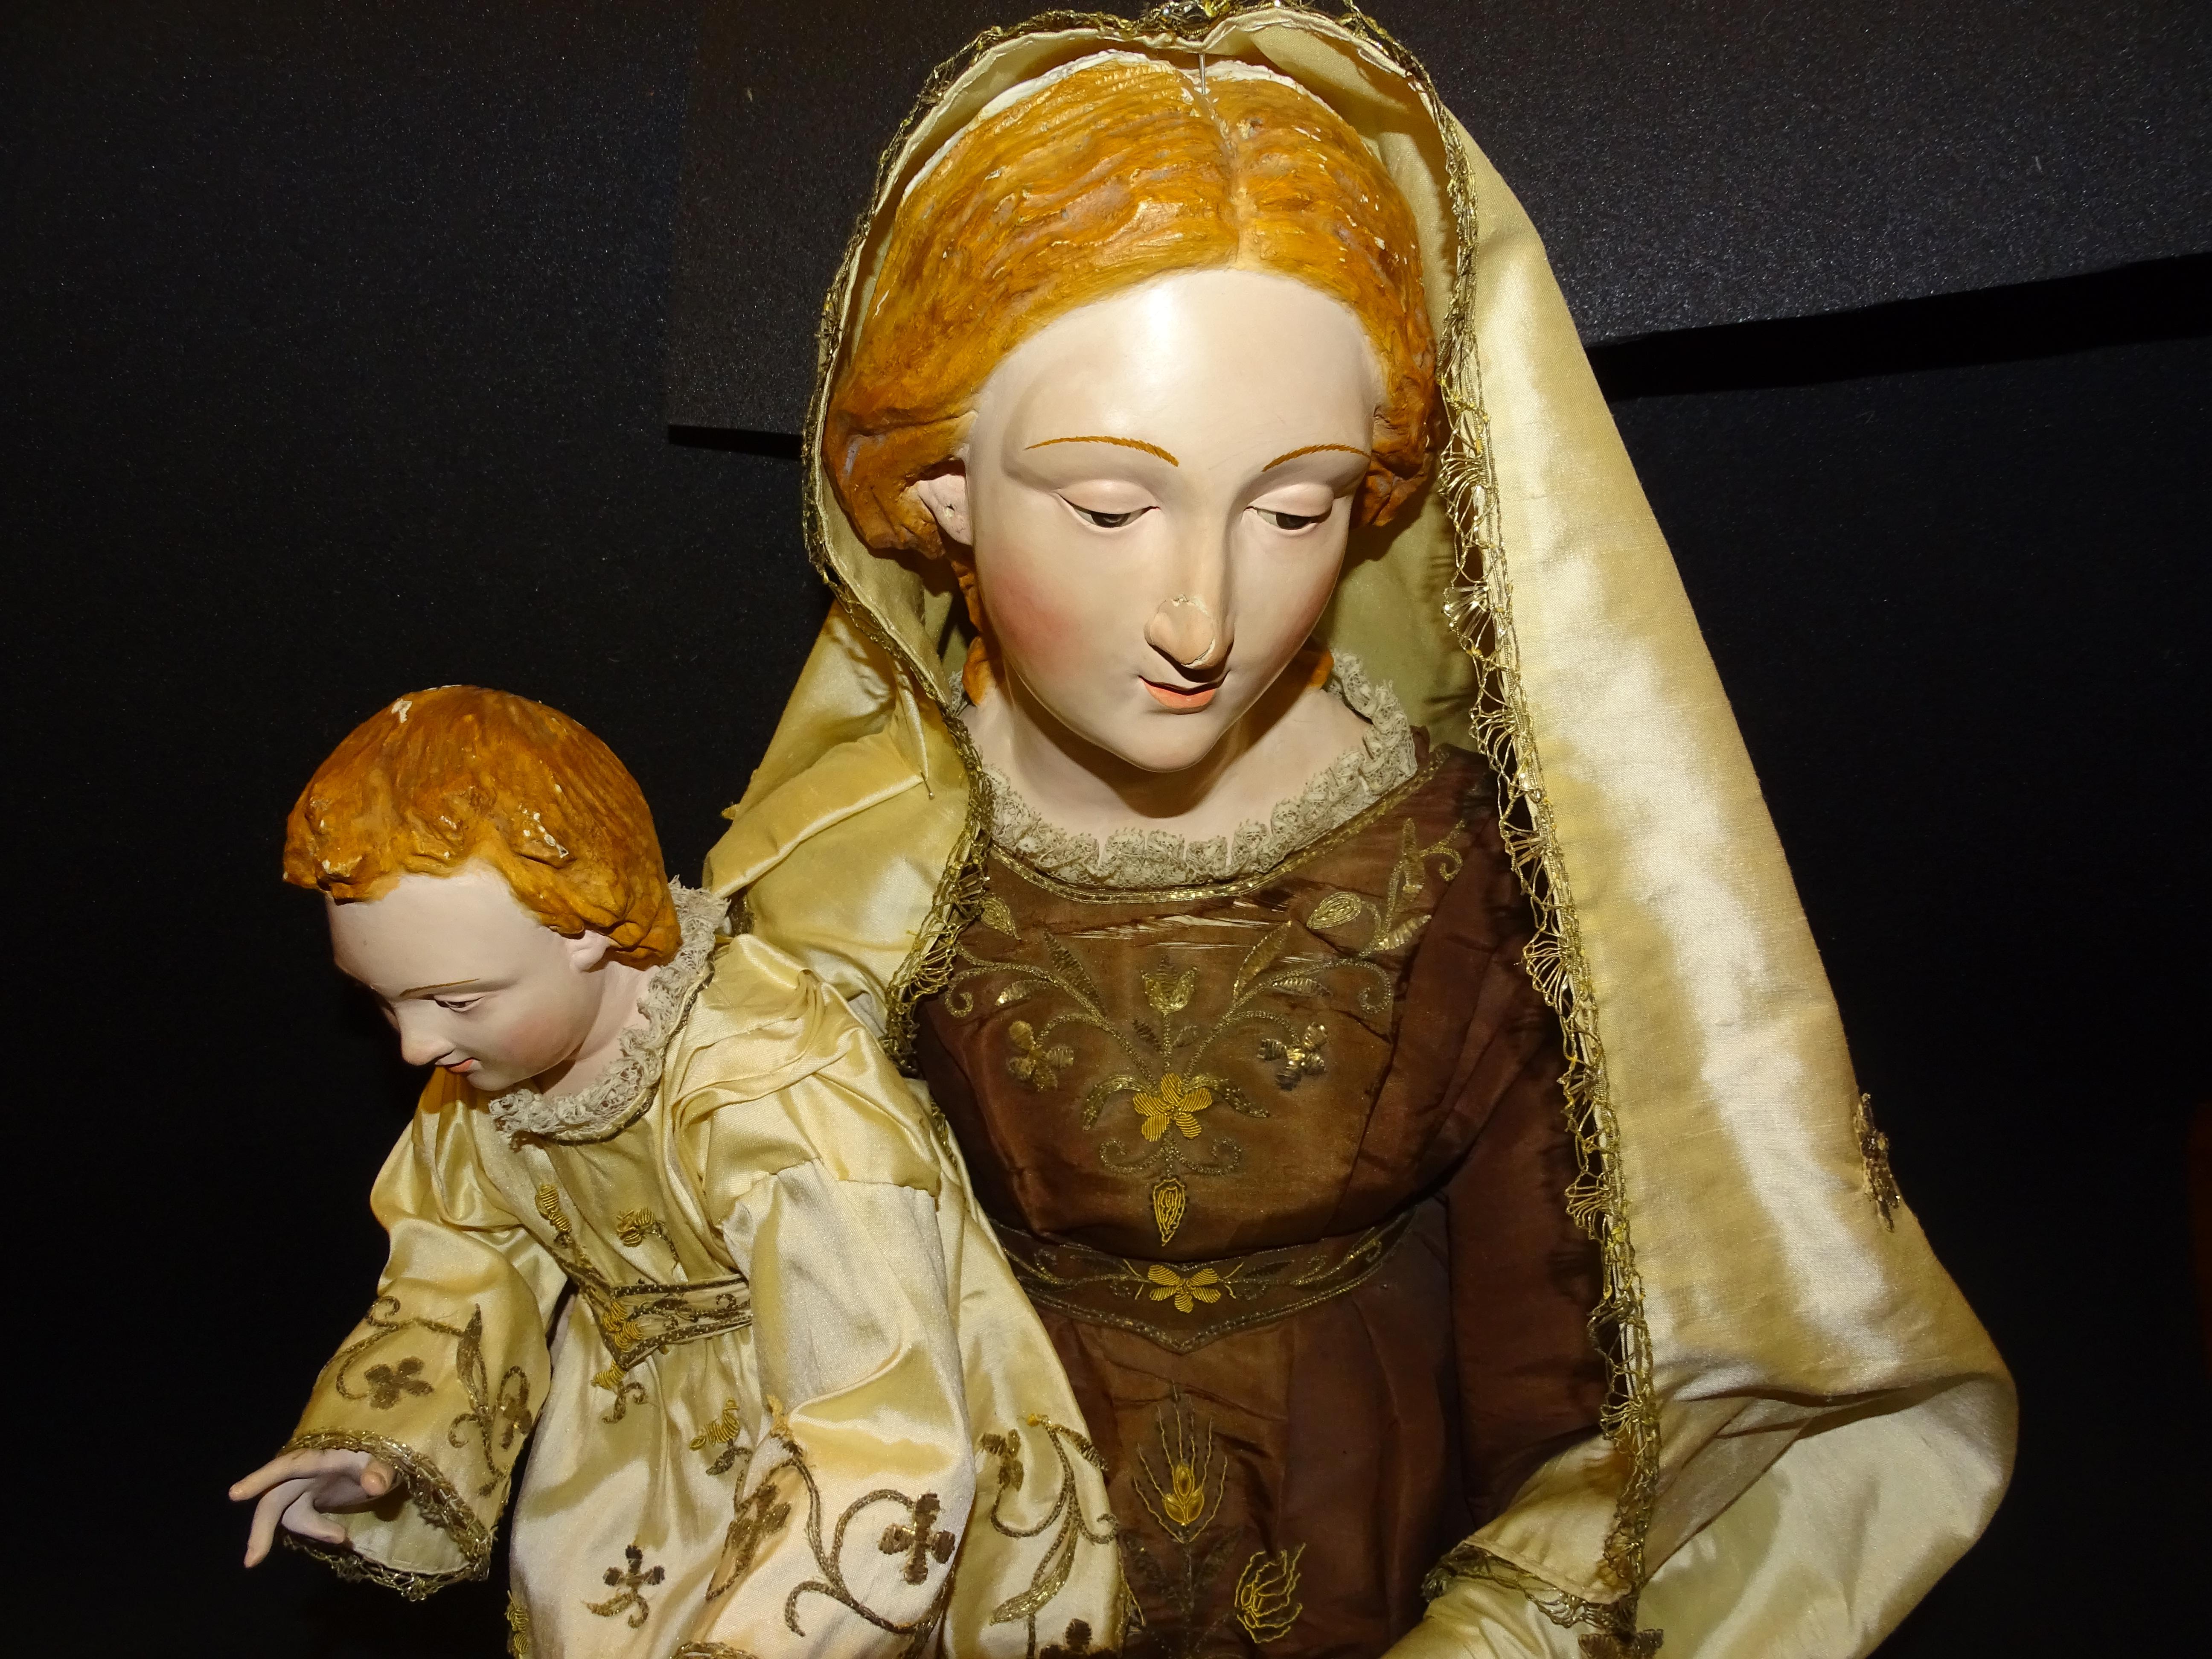 Neapolitan Scupture of a Virgin with the Child Jesus, Nativity 2